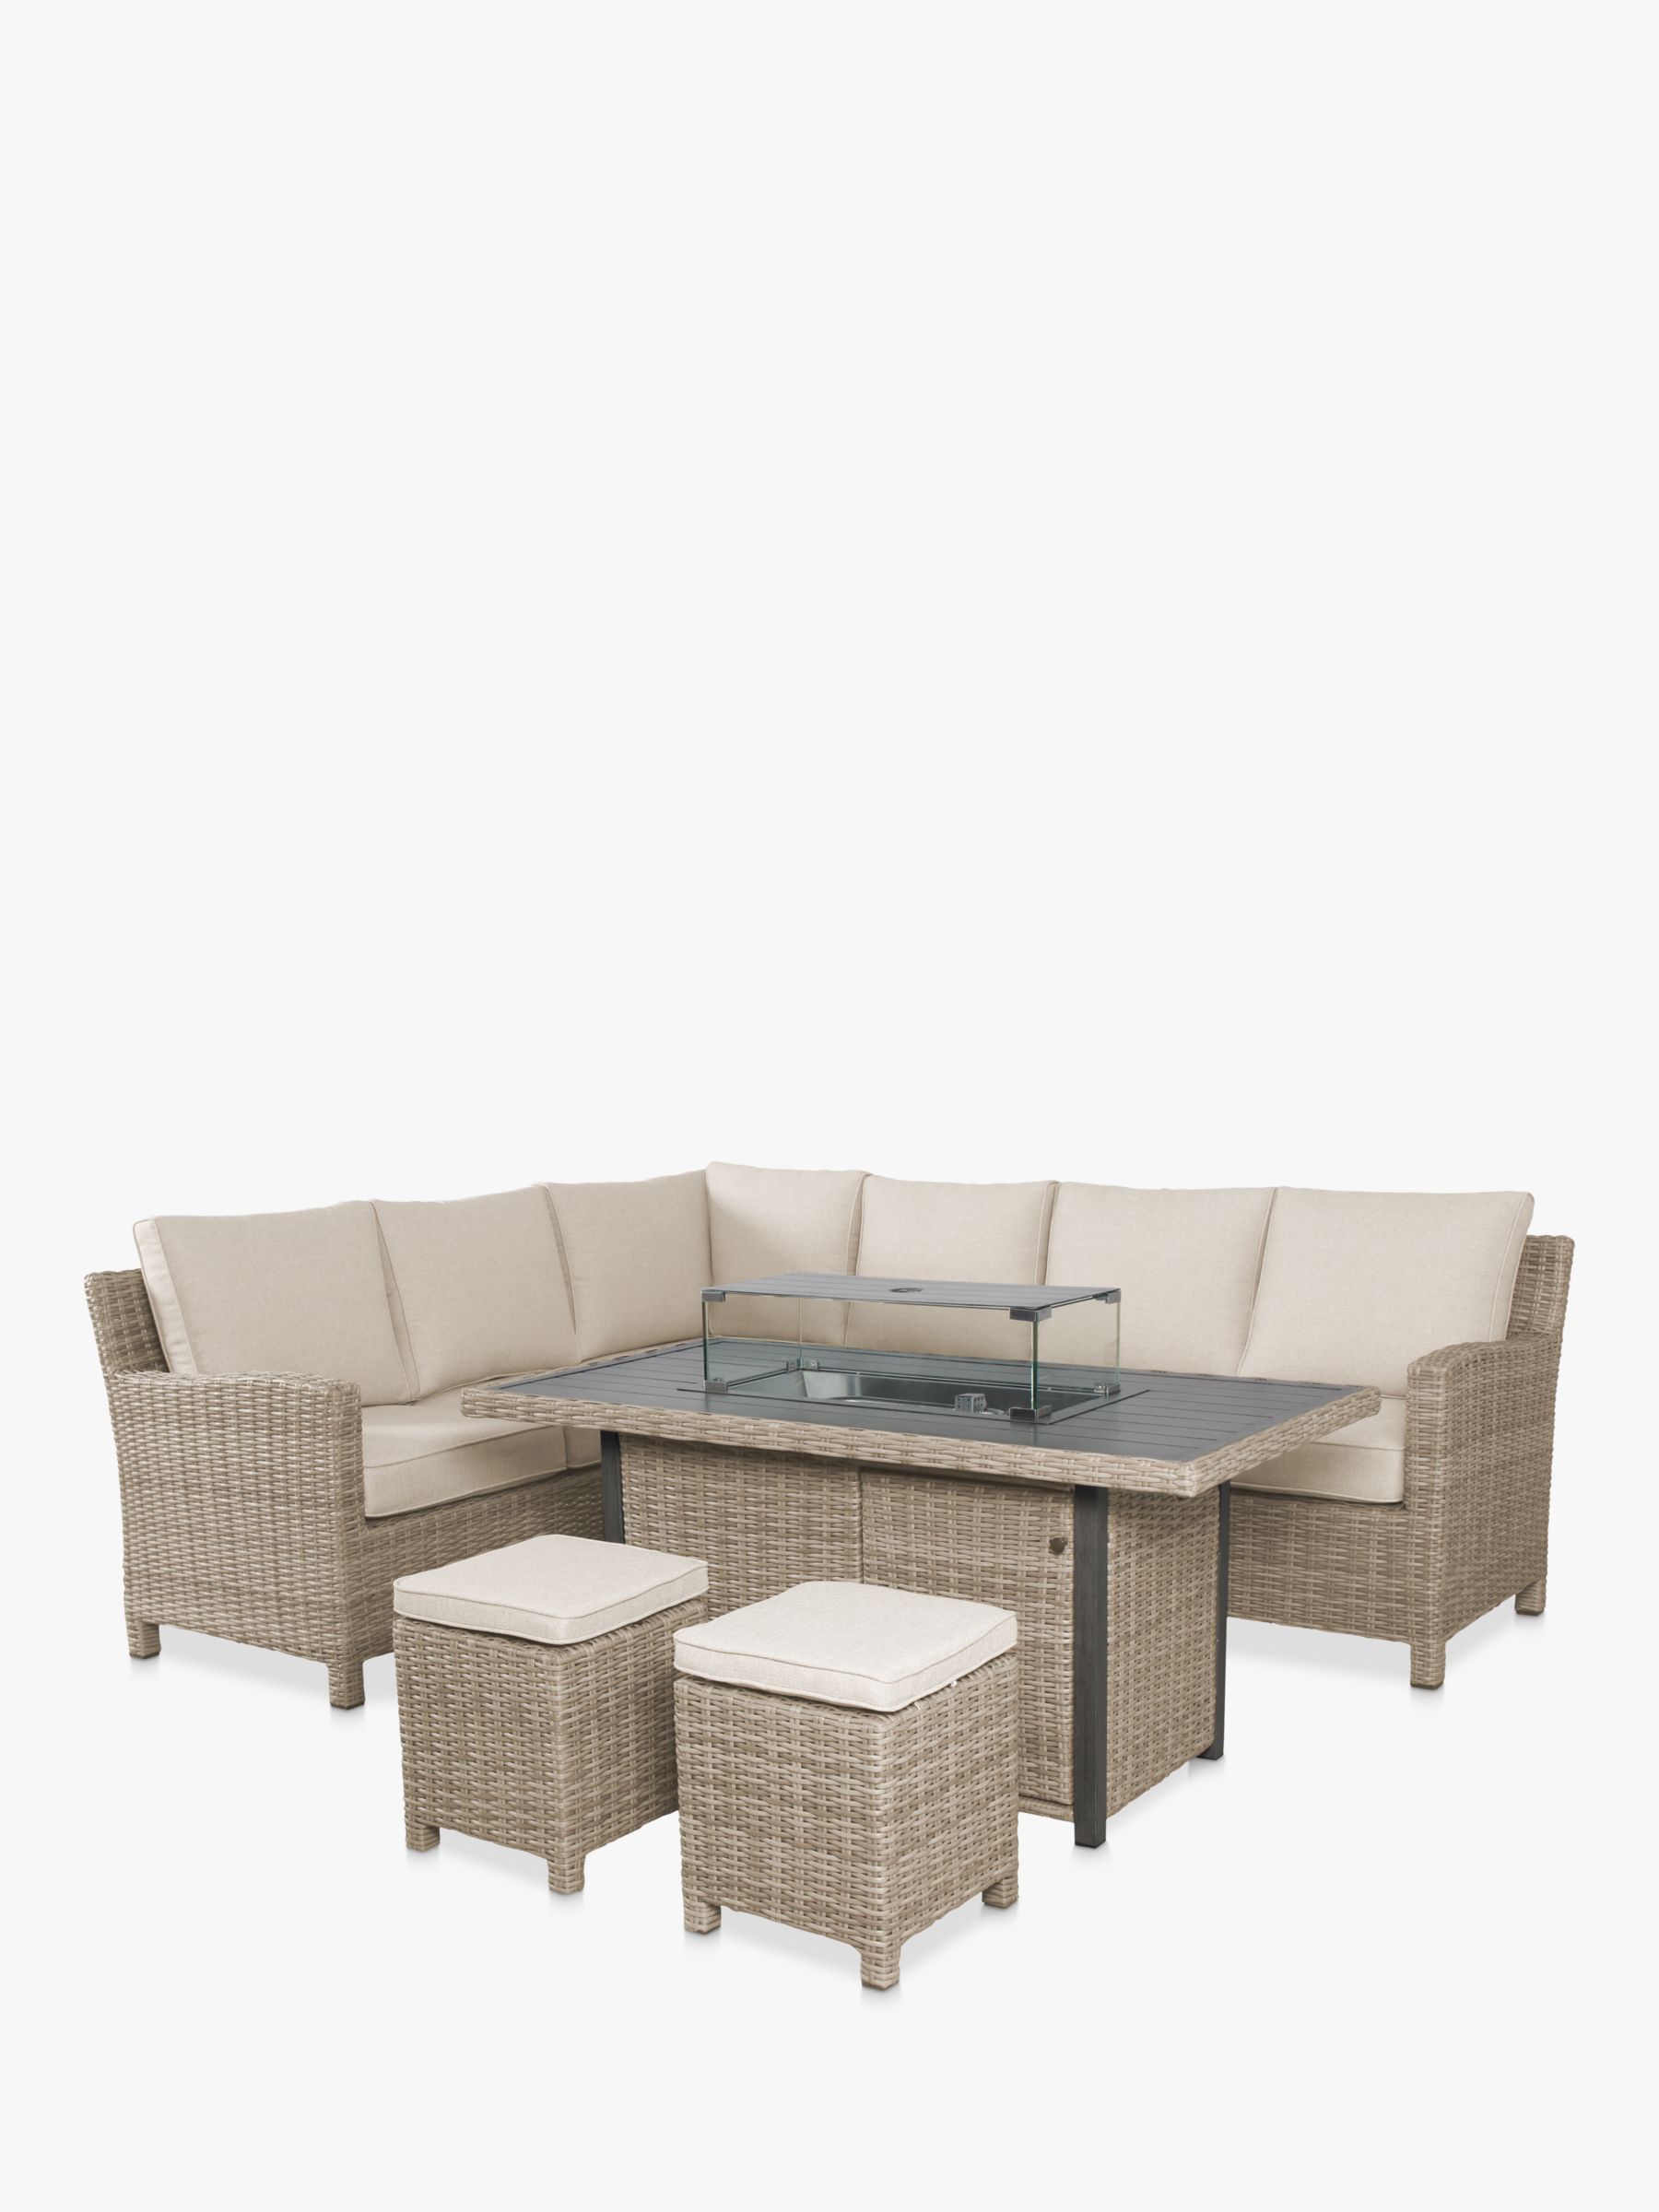 Photo of Kettler palma 8-seat garden corner casual dining table & chairs set with firepit